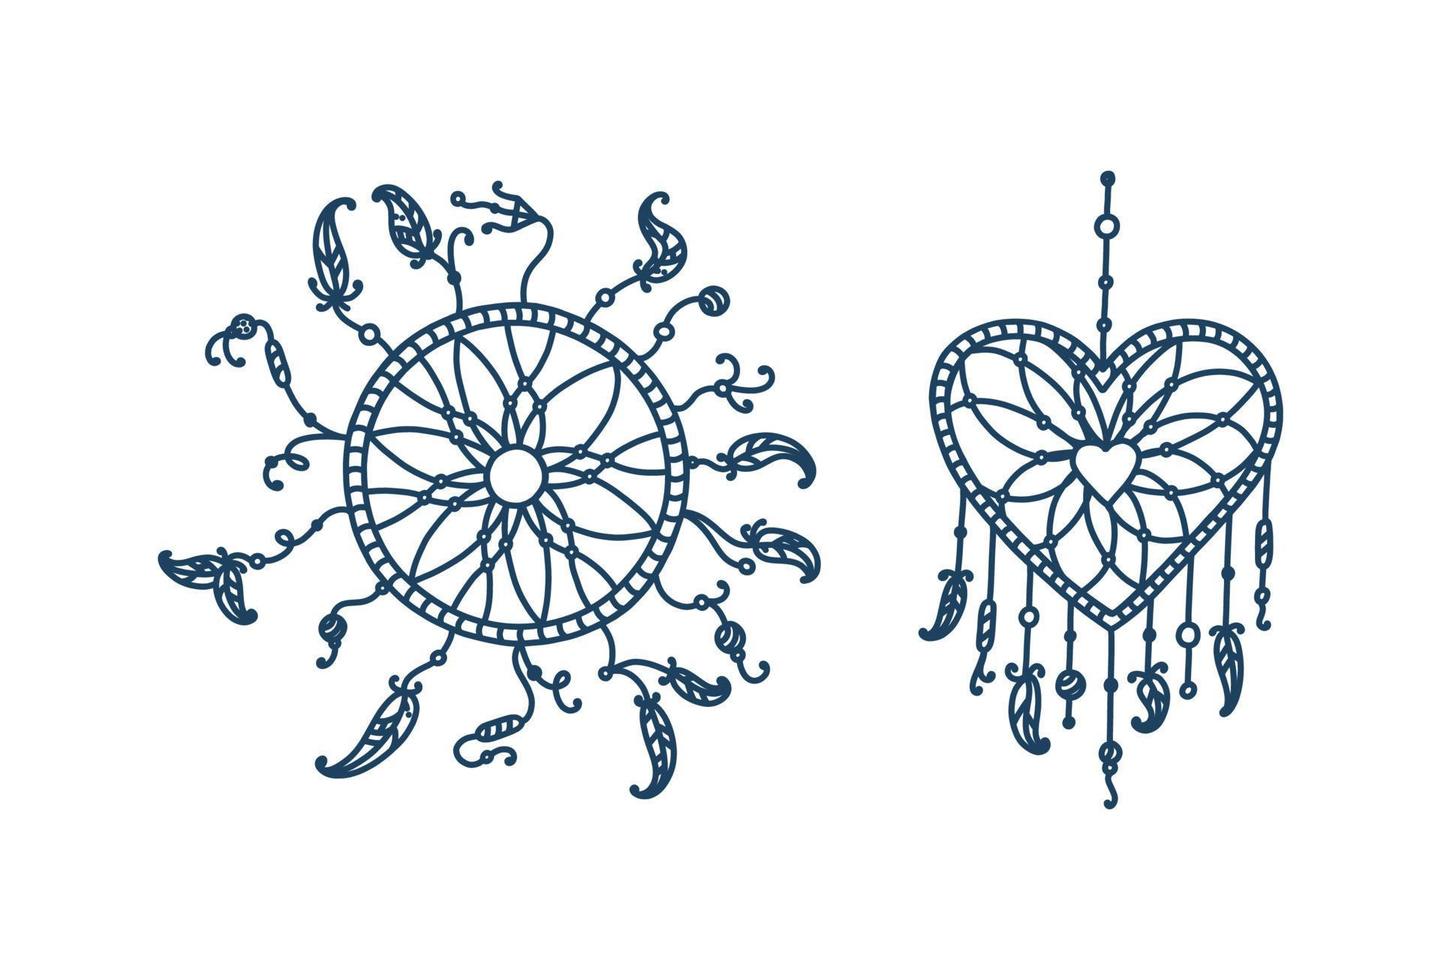 Dreamcatcher circle and heart with feathers. Set of dreamcatchers with tribal feathers. Vector illustration